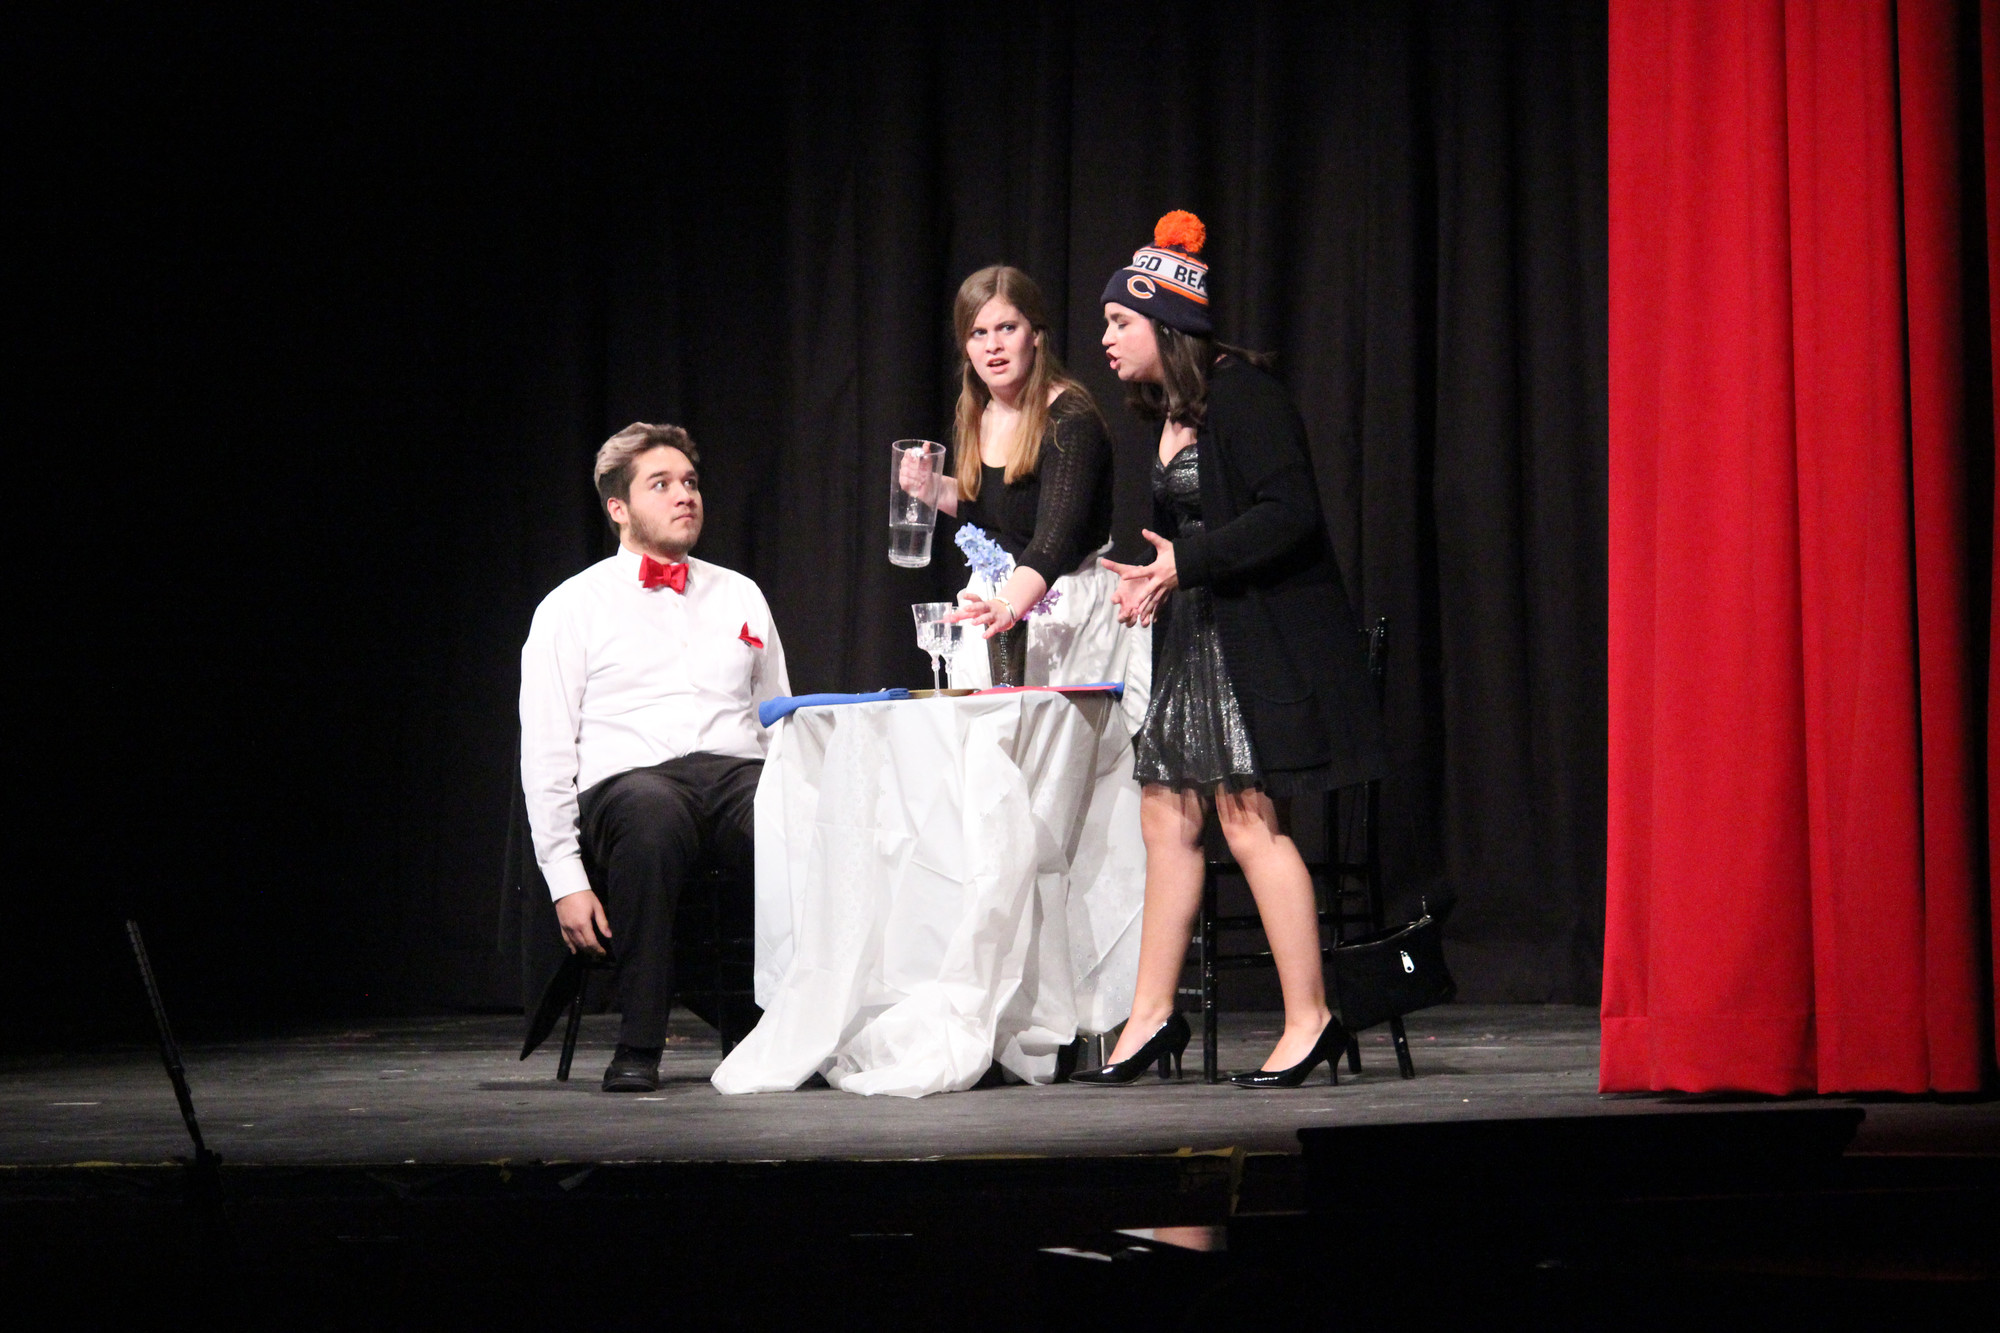 On Jan. 9, South Side High School students staged a series of student-directed one-act comedies for their I.B. Theater class. Above, in “Check, Please,” Connor Coniglio was taken aback when his blind date, played by Lane McKenna, turned out to be an overzealous Chicago Bears fan. Julia Baxley played the waitress. (Theresa Press/Herald)